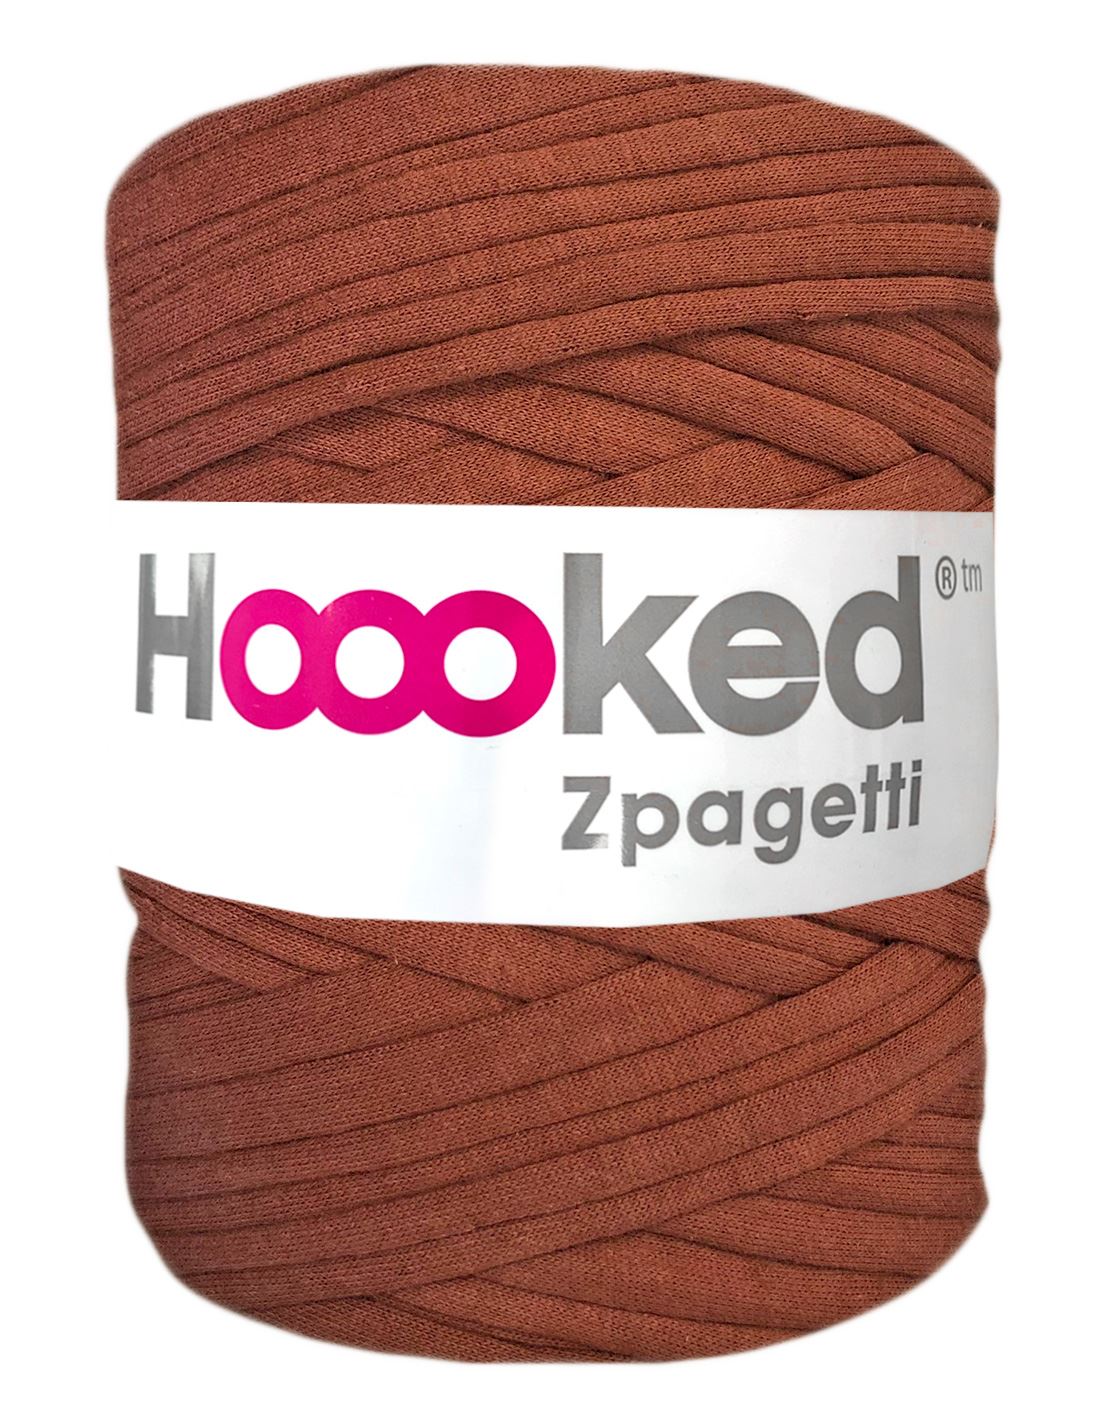 Hot chocolate brown t-shirt yarn by Hoooked Zpagetti (100-120m)